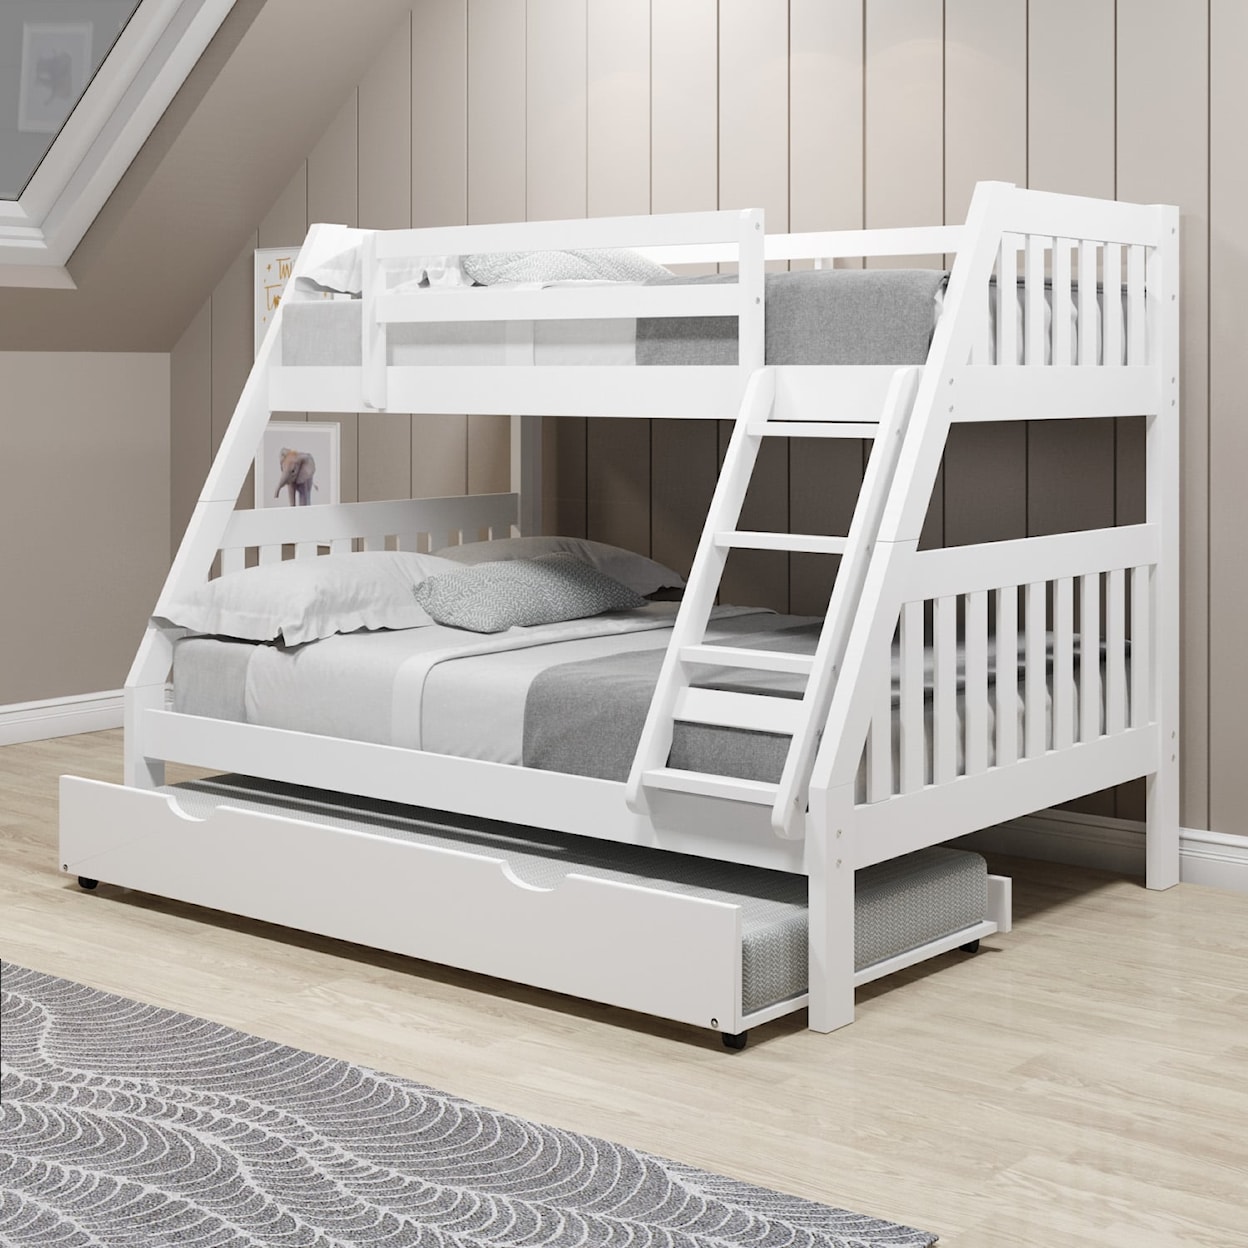 Donco Trading Co Loft Beds Twin/Full Bunk Bed